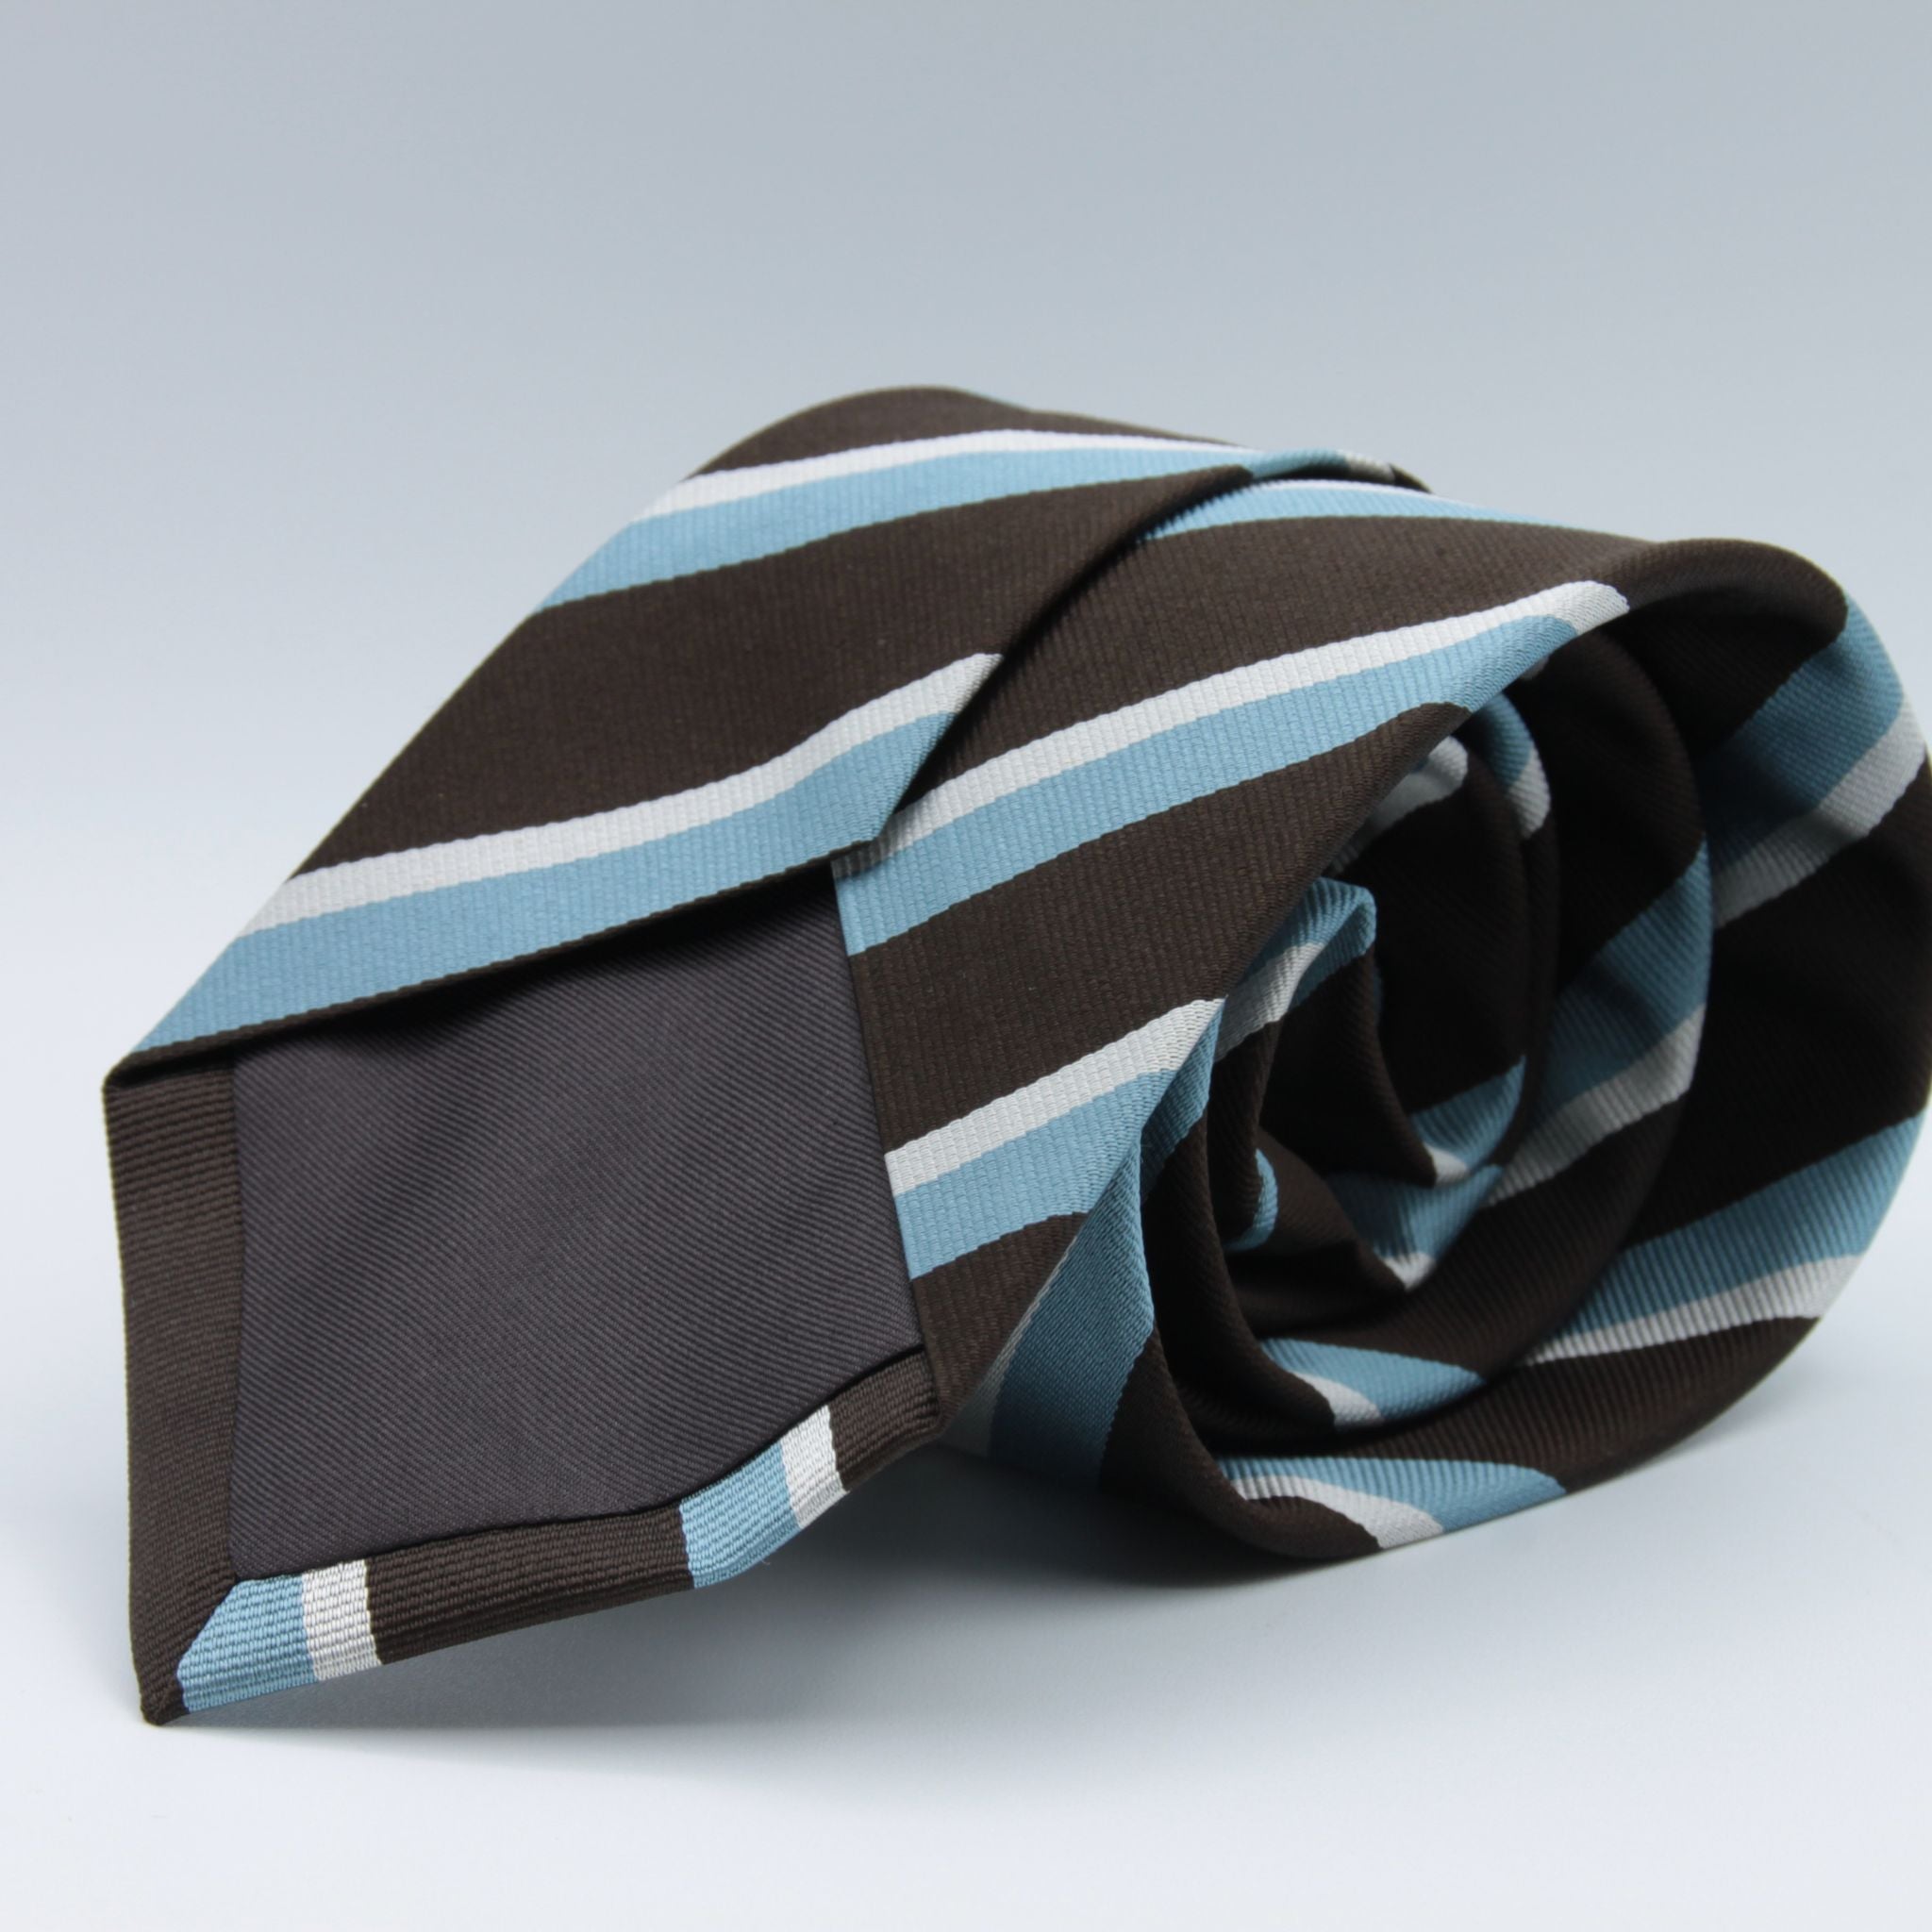 Holliday & Brown for Cruciani & Bella 100% Silk Tipped Jacquard  Regimental "Cambridge Old Mill Hill" Brown, Light Blue and Off-White stripe tie Handmade in Italy 9 cm x 148 cm #6608